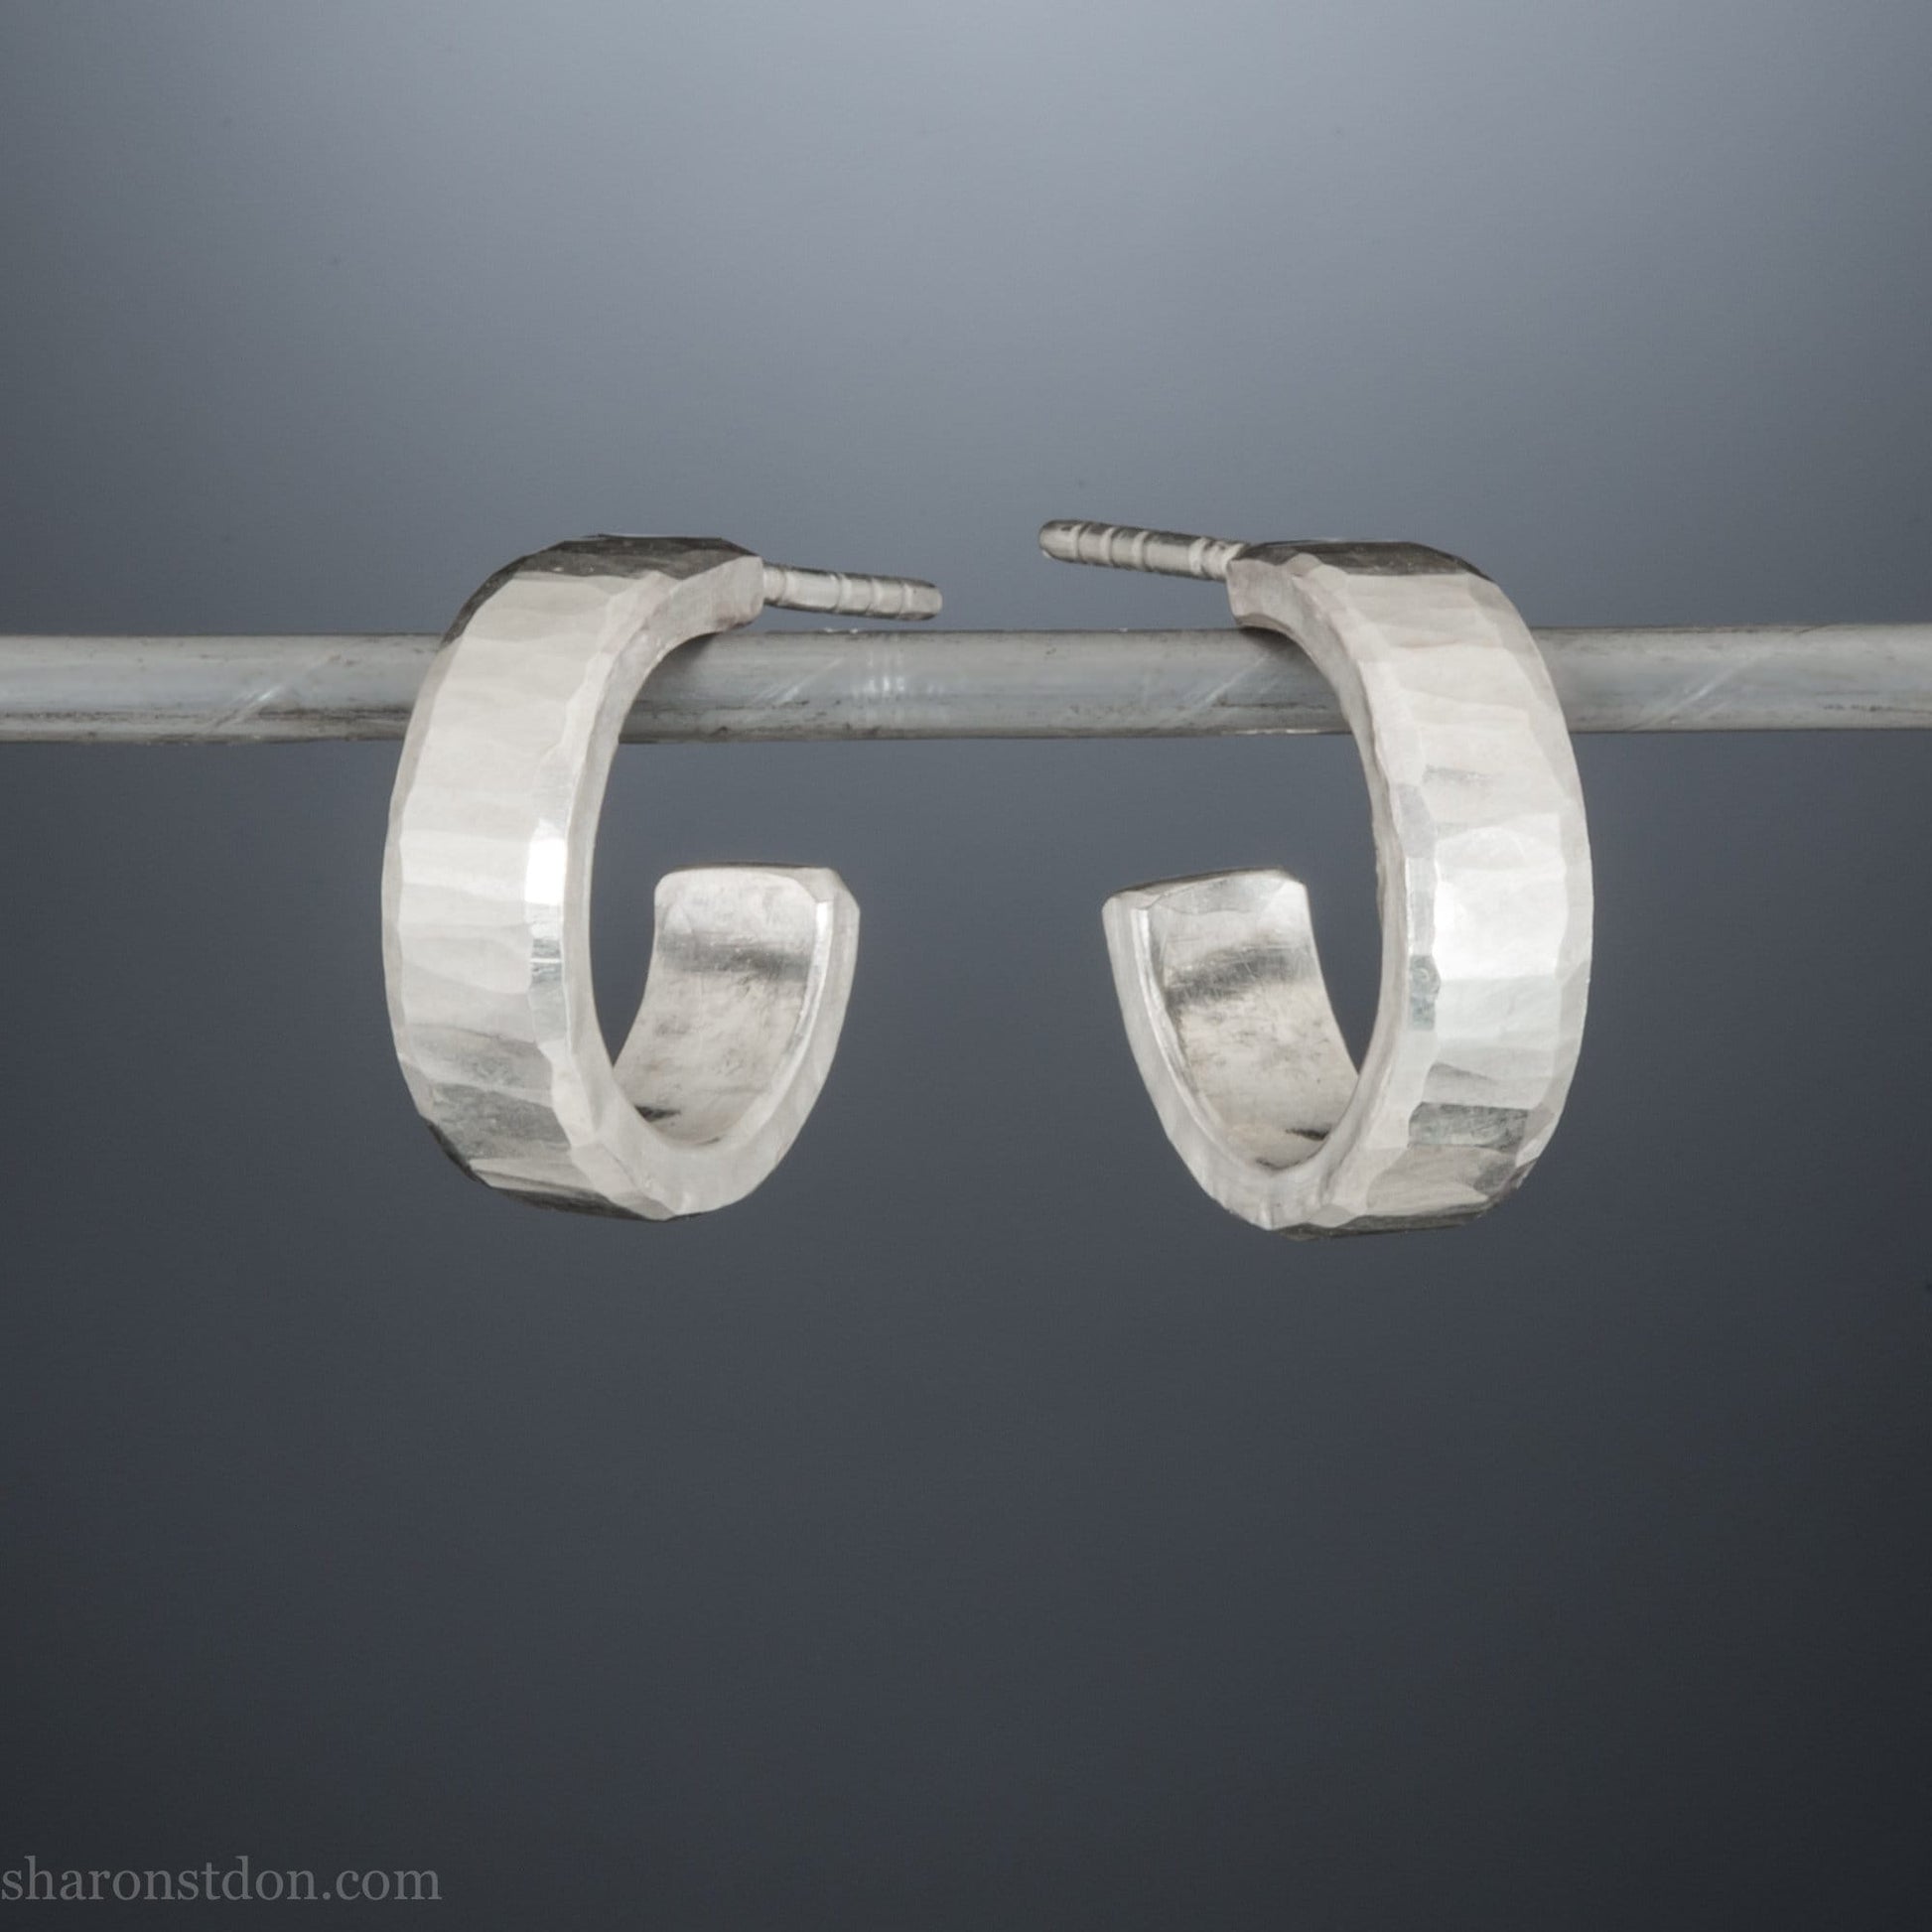 14mm x 4mm small sterling silver hoop earrings, Handmade in North America by Sharon SaintDon. Shiny, hammered texture, solid silver with silver posts and backs for men or women.